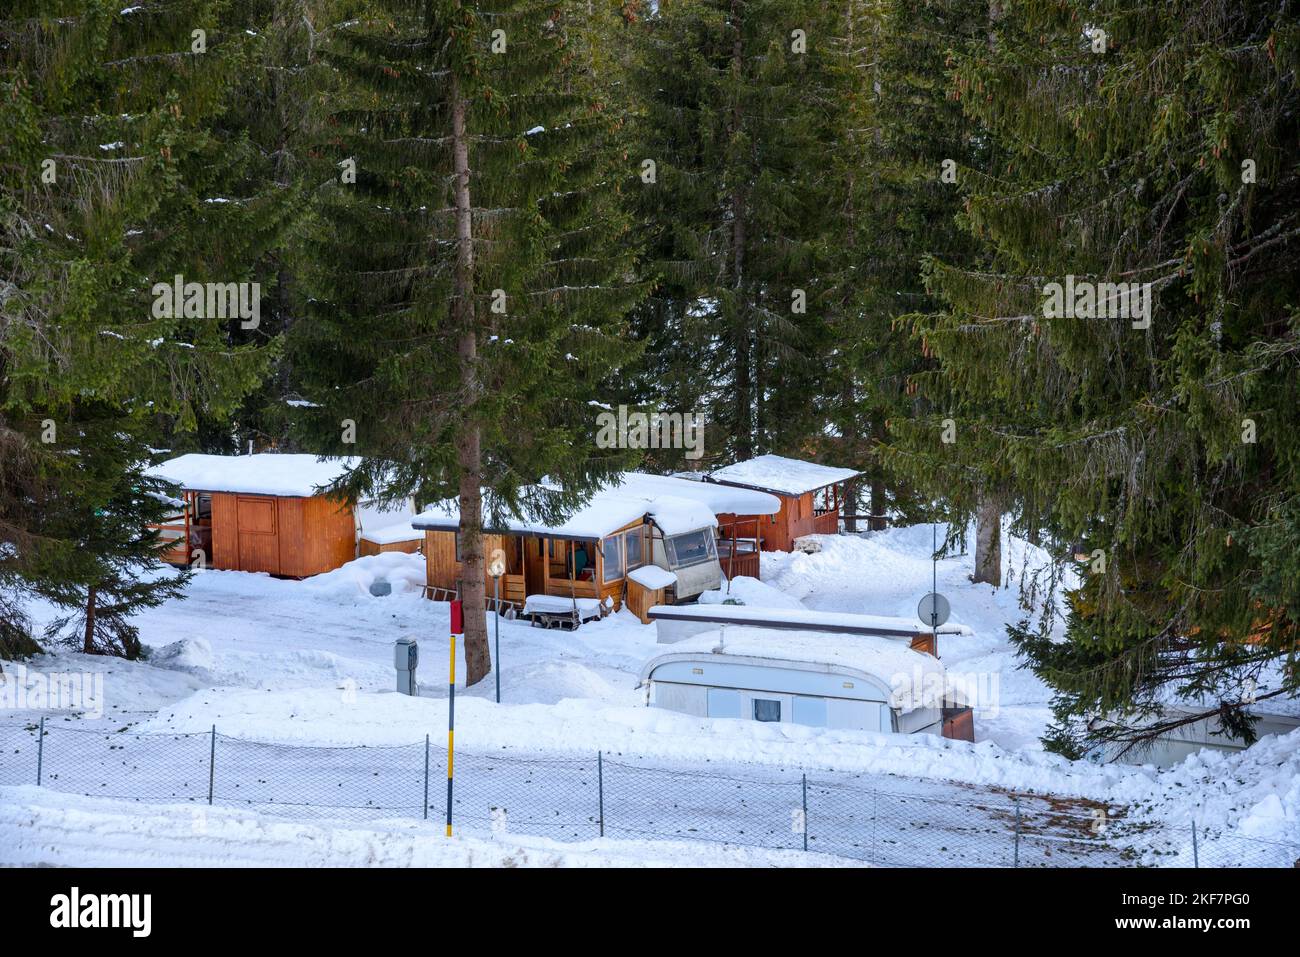 View of a campground in a snowy forest in the mountains in winter Stock Photo